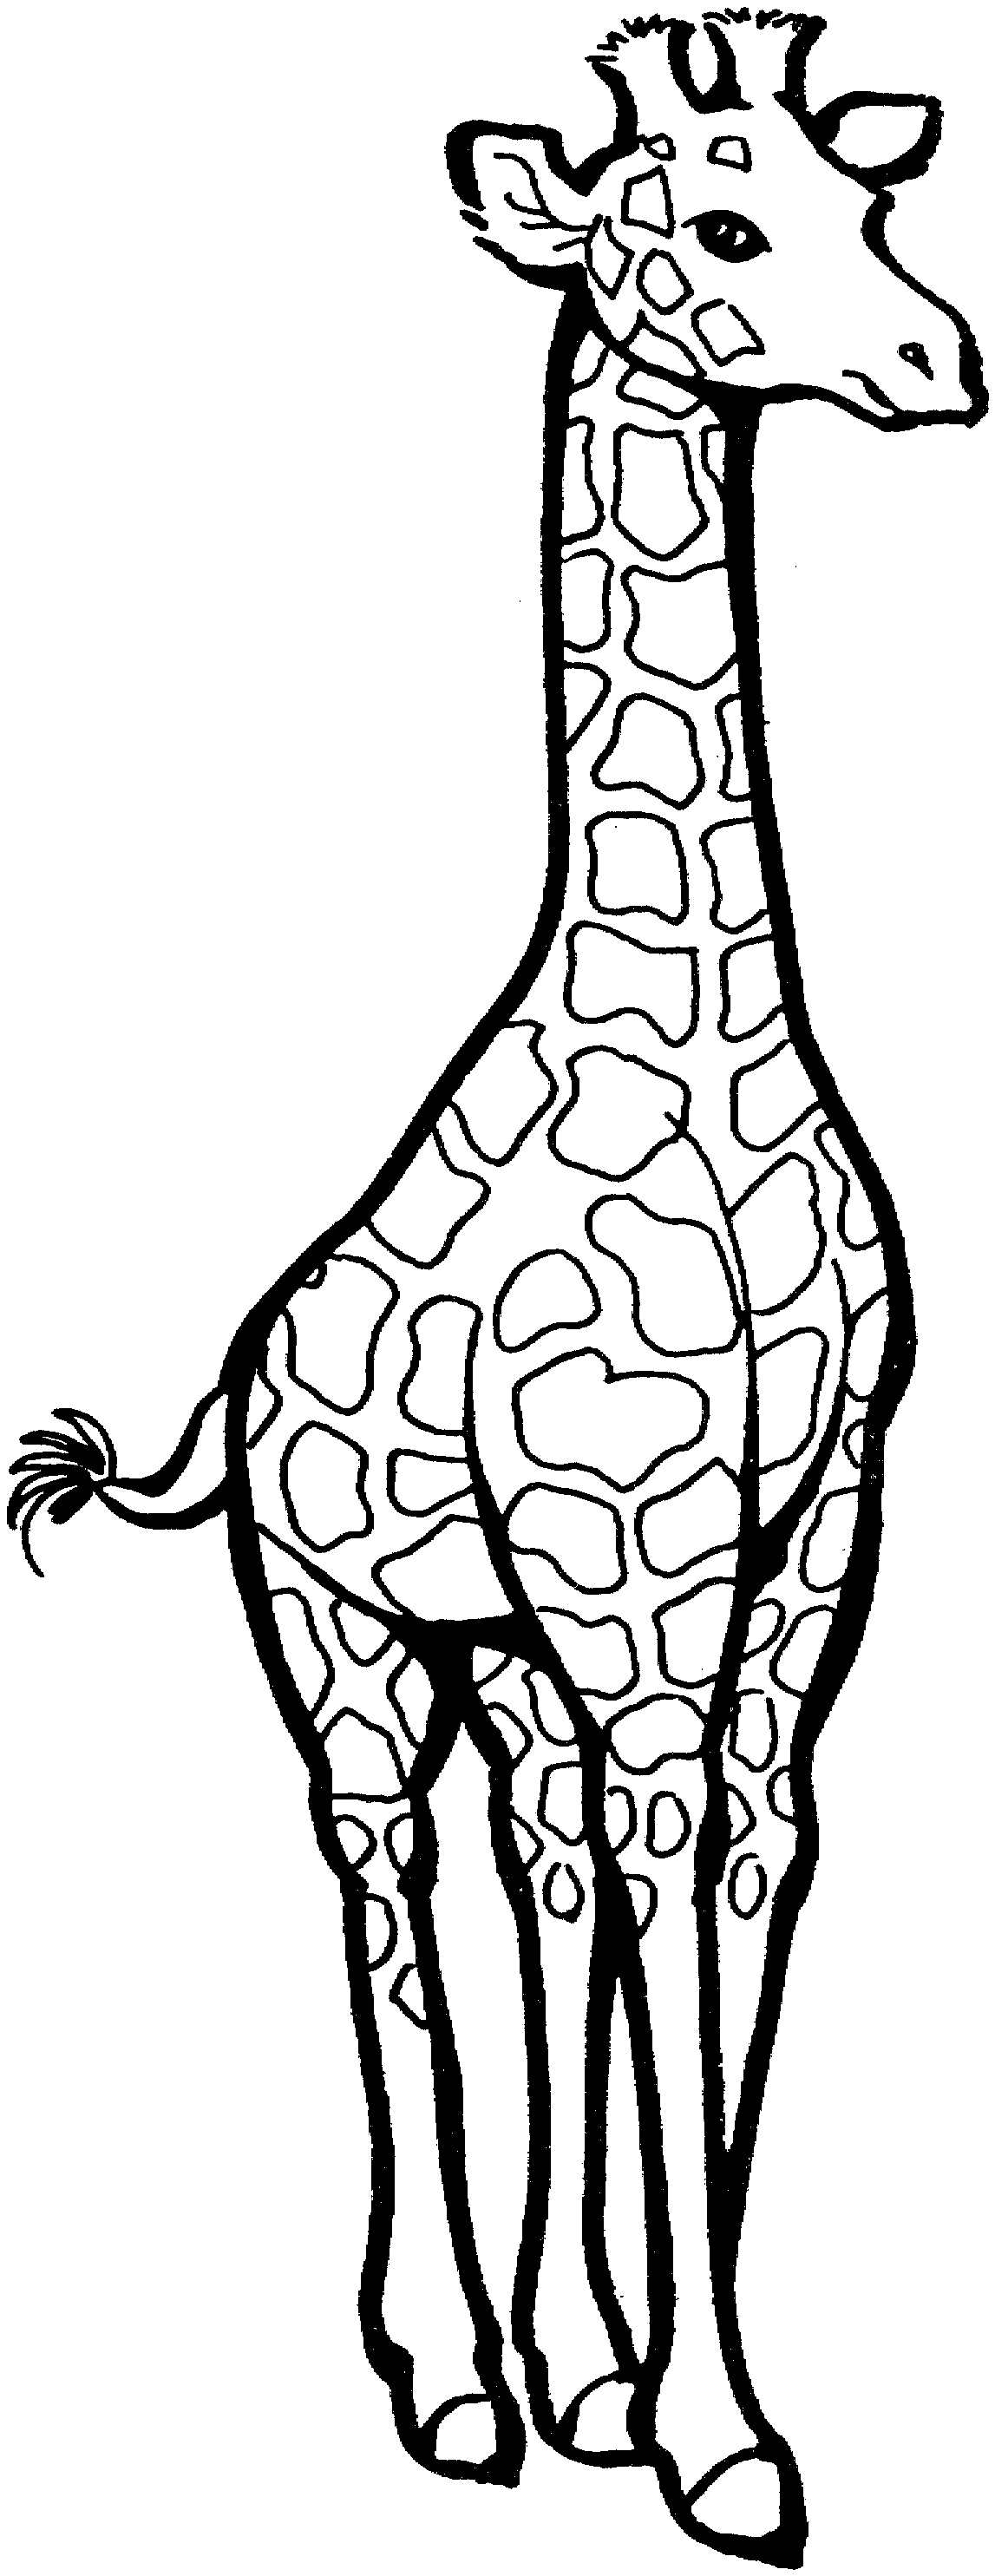 Giraffe And Baby Coloring Pages 8